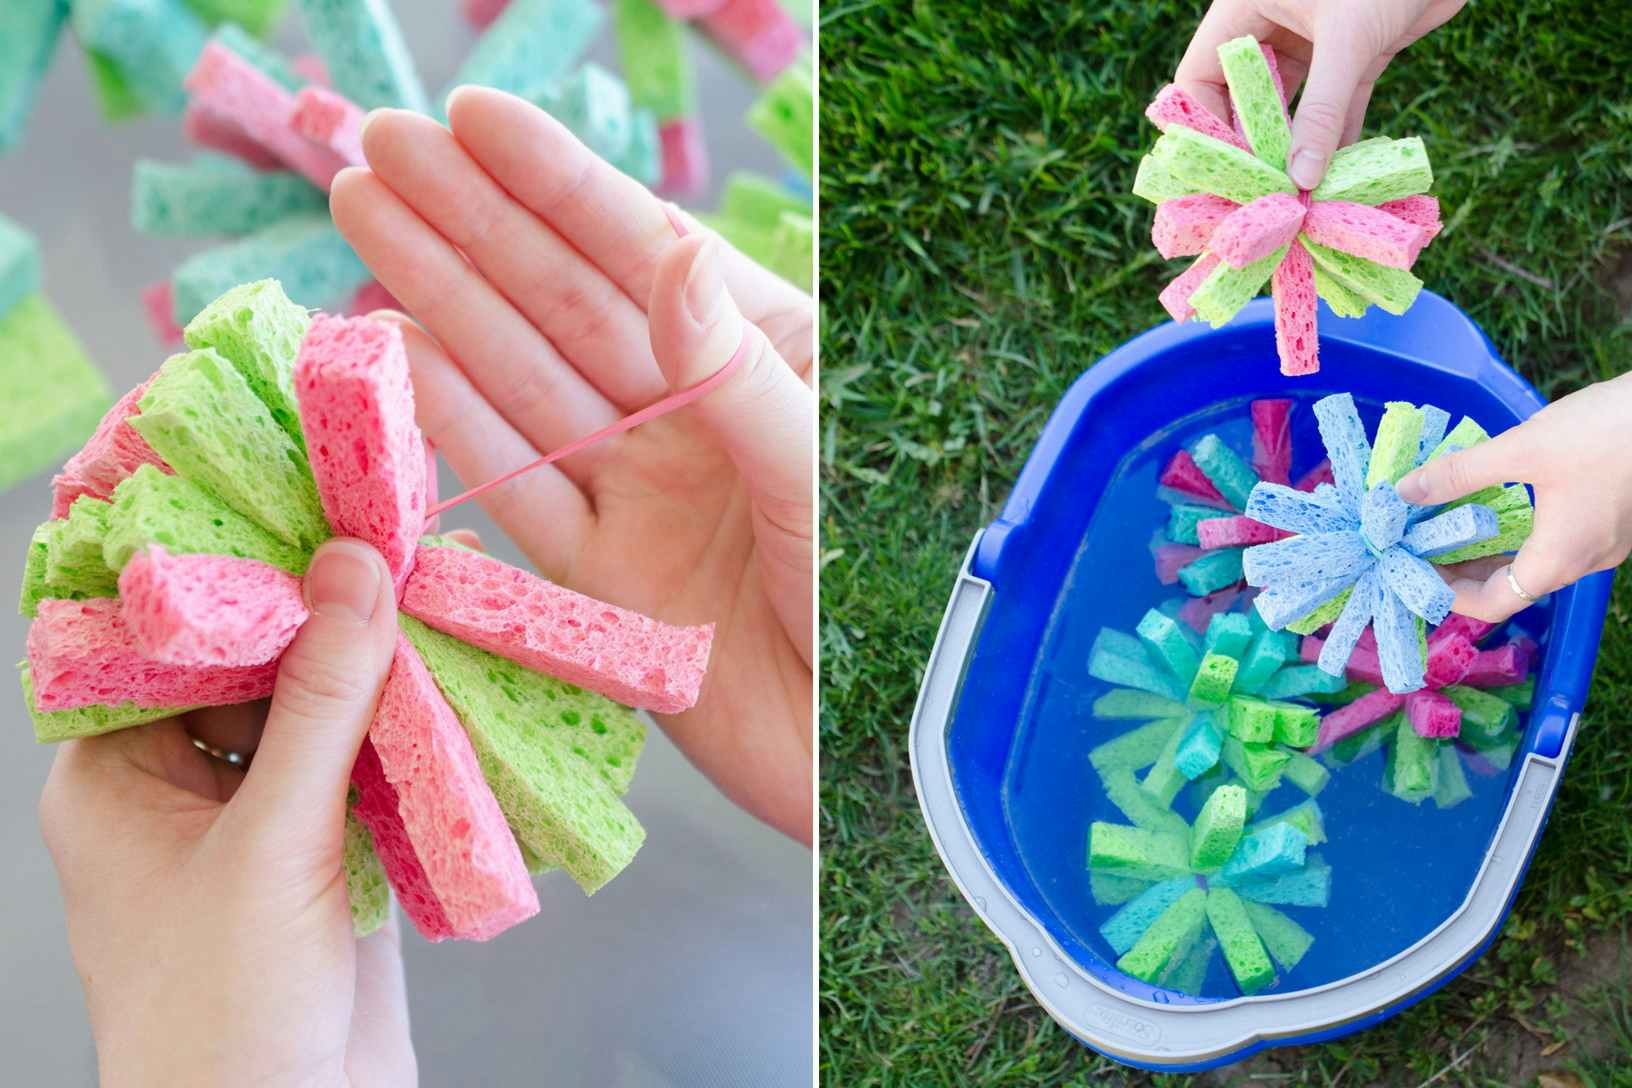 A person's hands using a rubber band to tie sponge strips together to form a sponge ball, and someone putting some sponge balls into a bucket of water sitting out on the grass with other sponge balls already soaking.